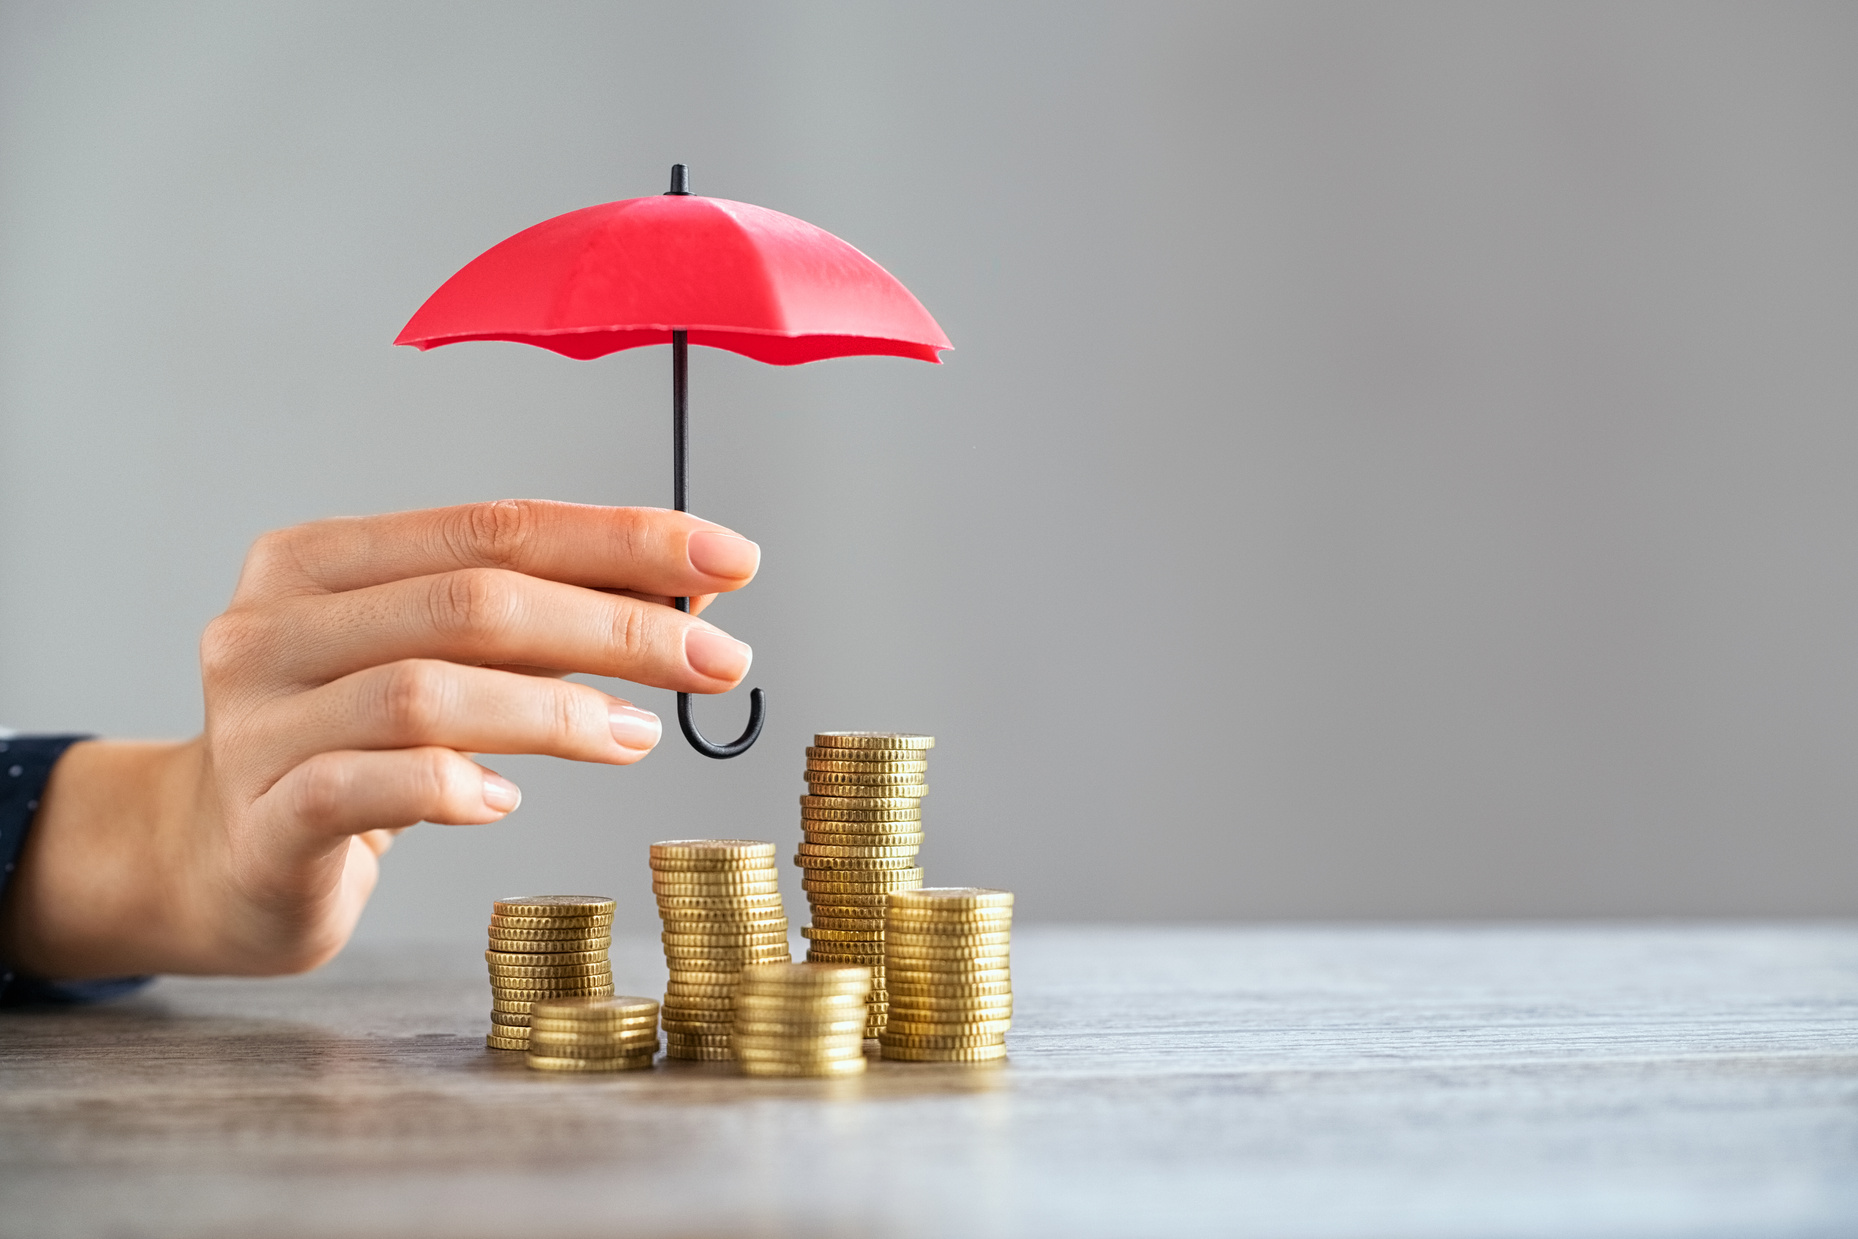 Person's Hand Protecting the Stacked Coins with an Umbrella